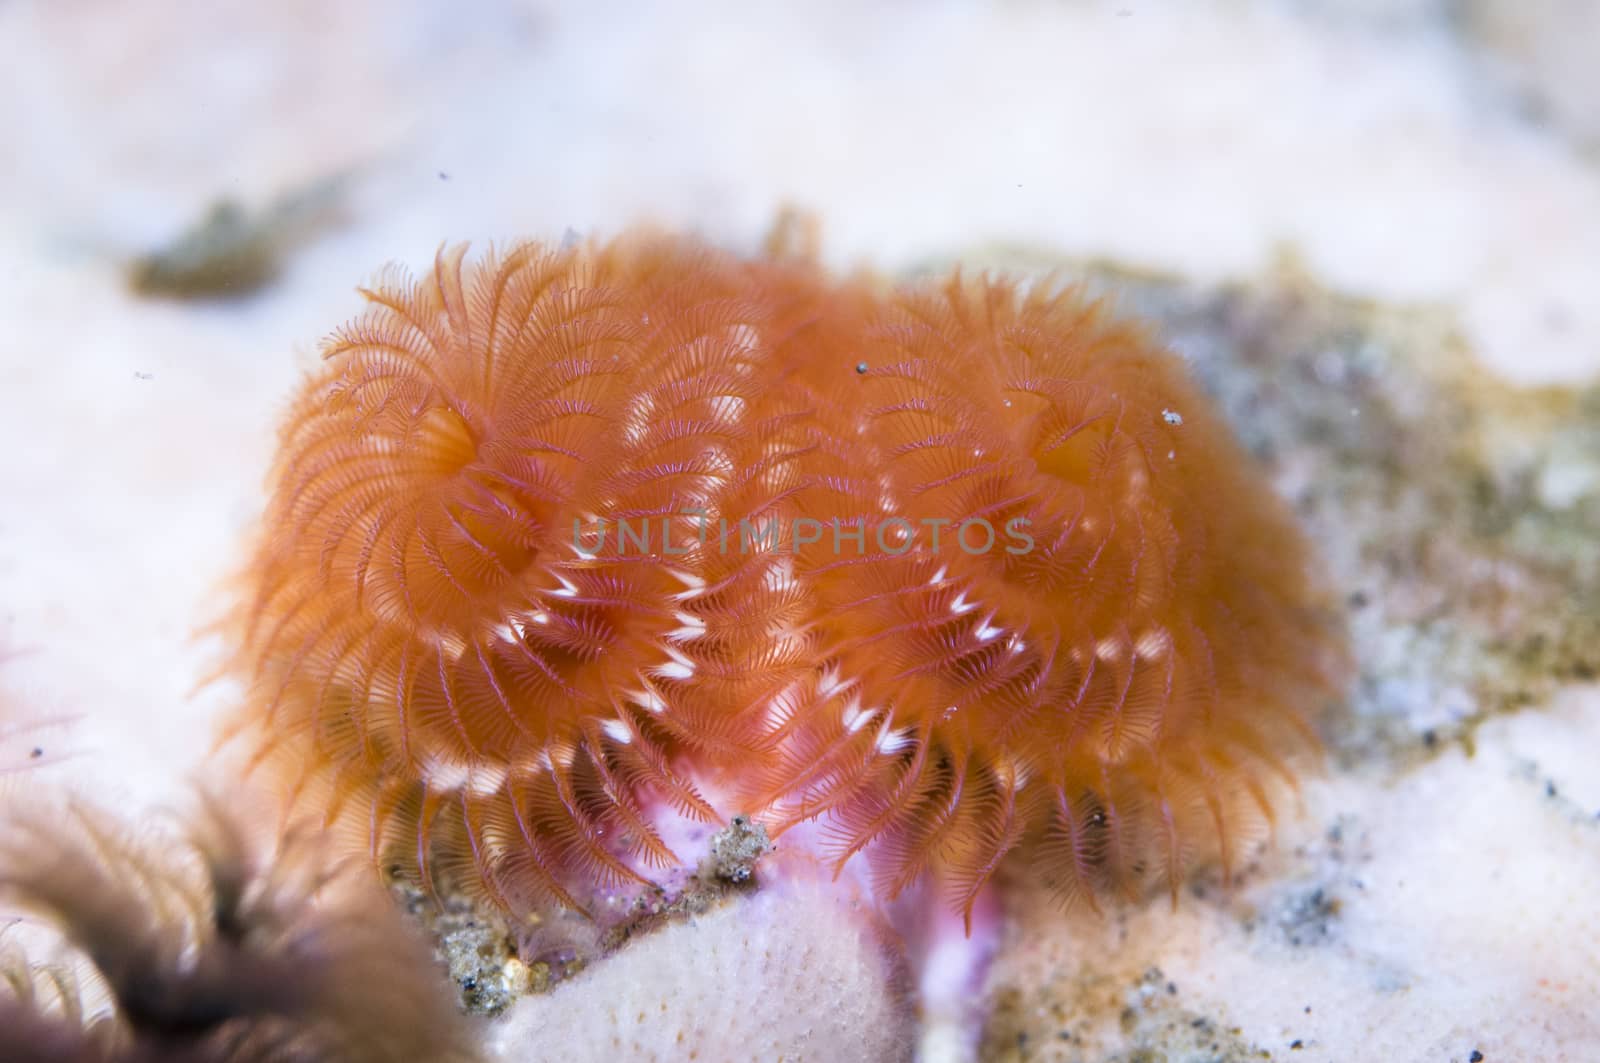 Spirobranchus giganteus commonly known as Christmas tree worms by Njean